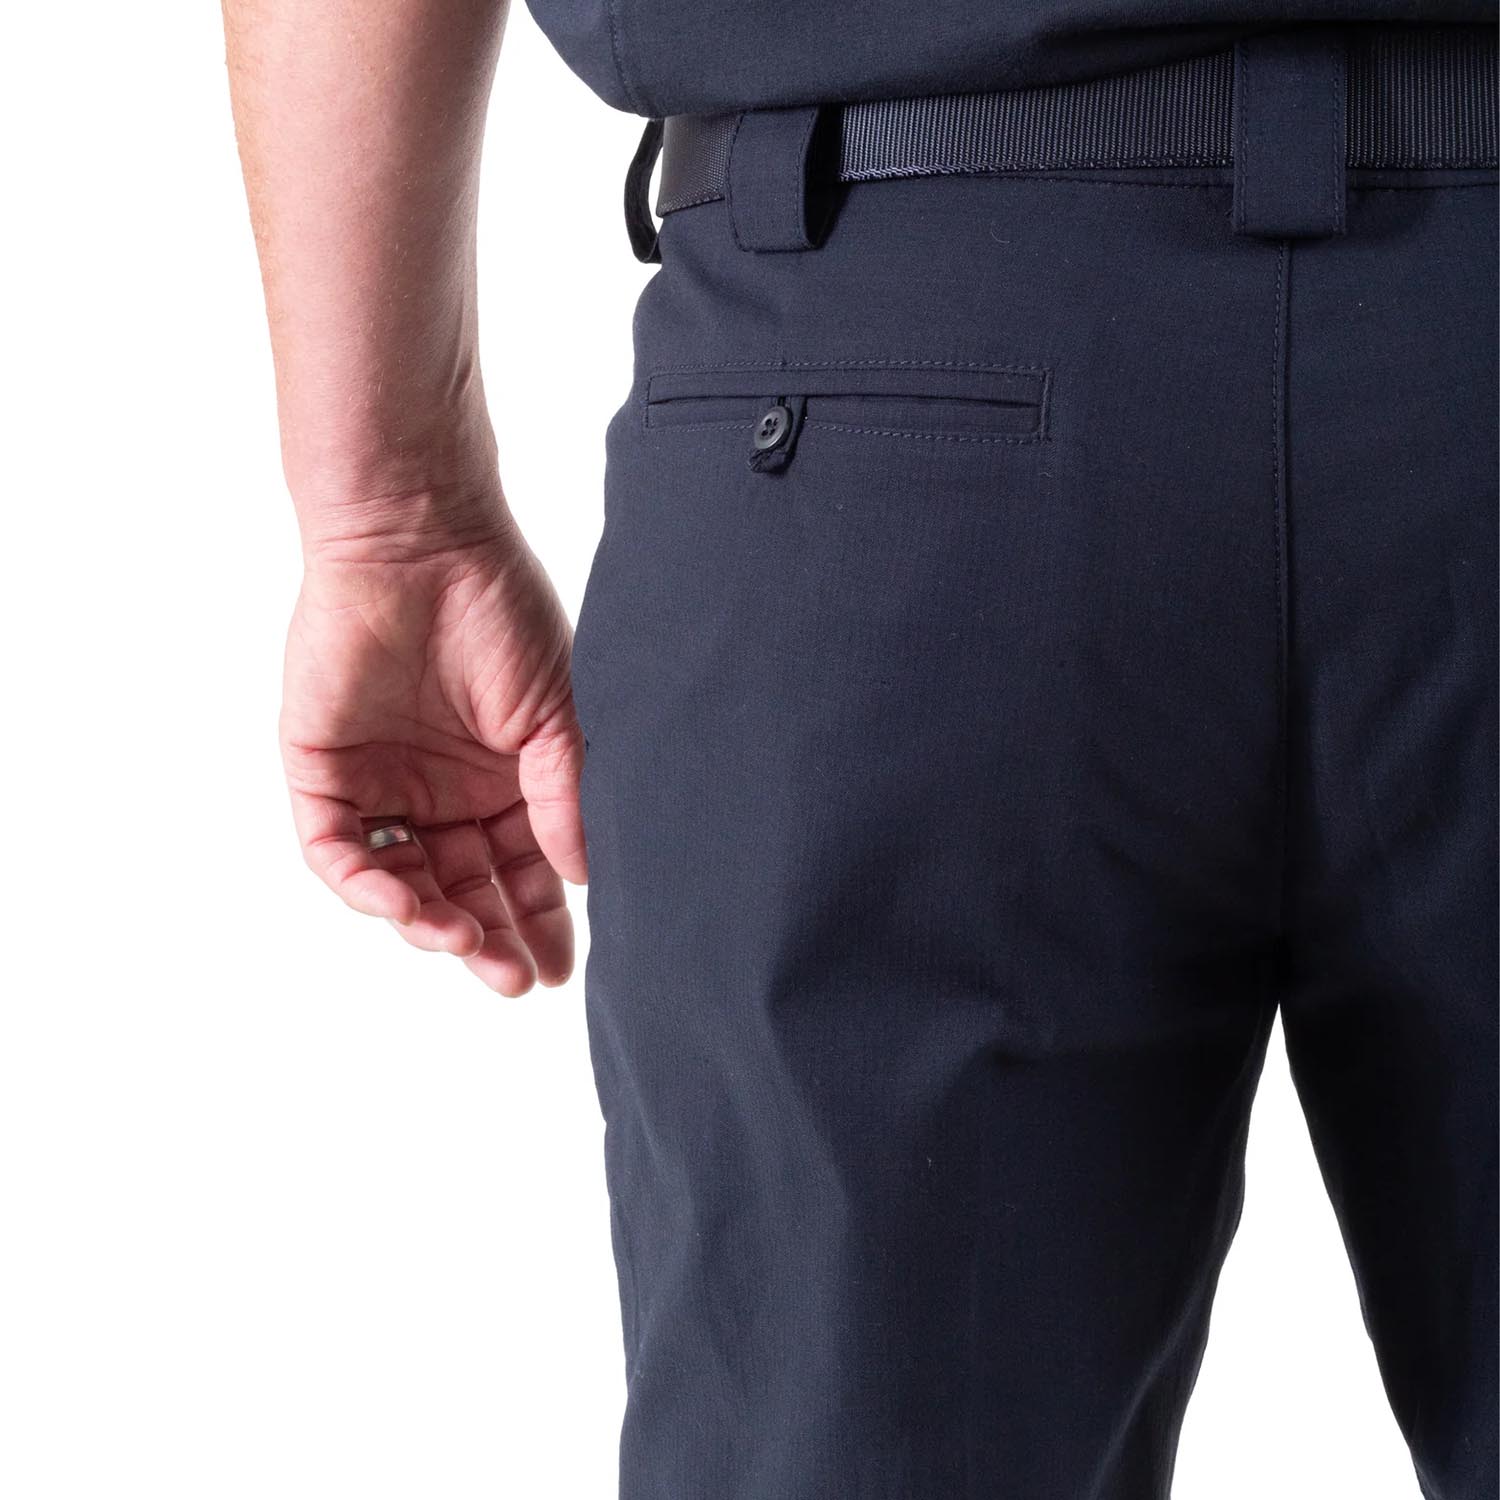 First Tactical Men's Cotton Station Pants